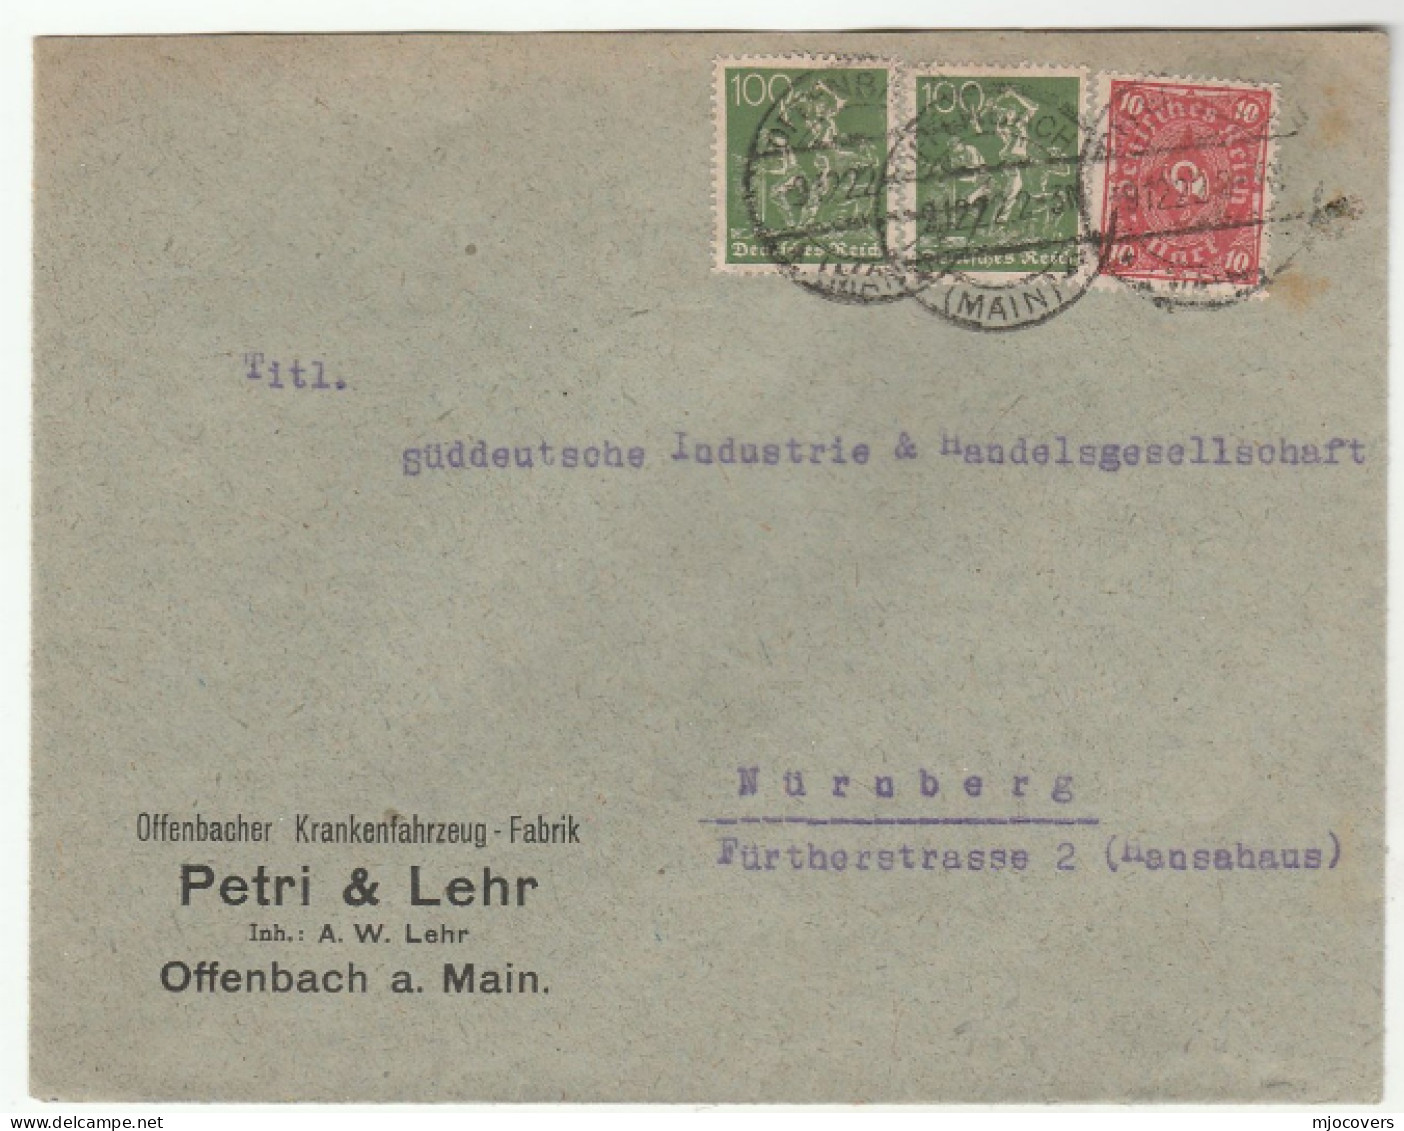 1922 Offenbach AMBULANCE FACTORY COVER Germany Stamps Health Medicine - First Aid